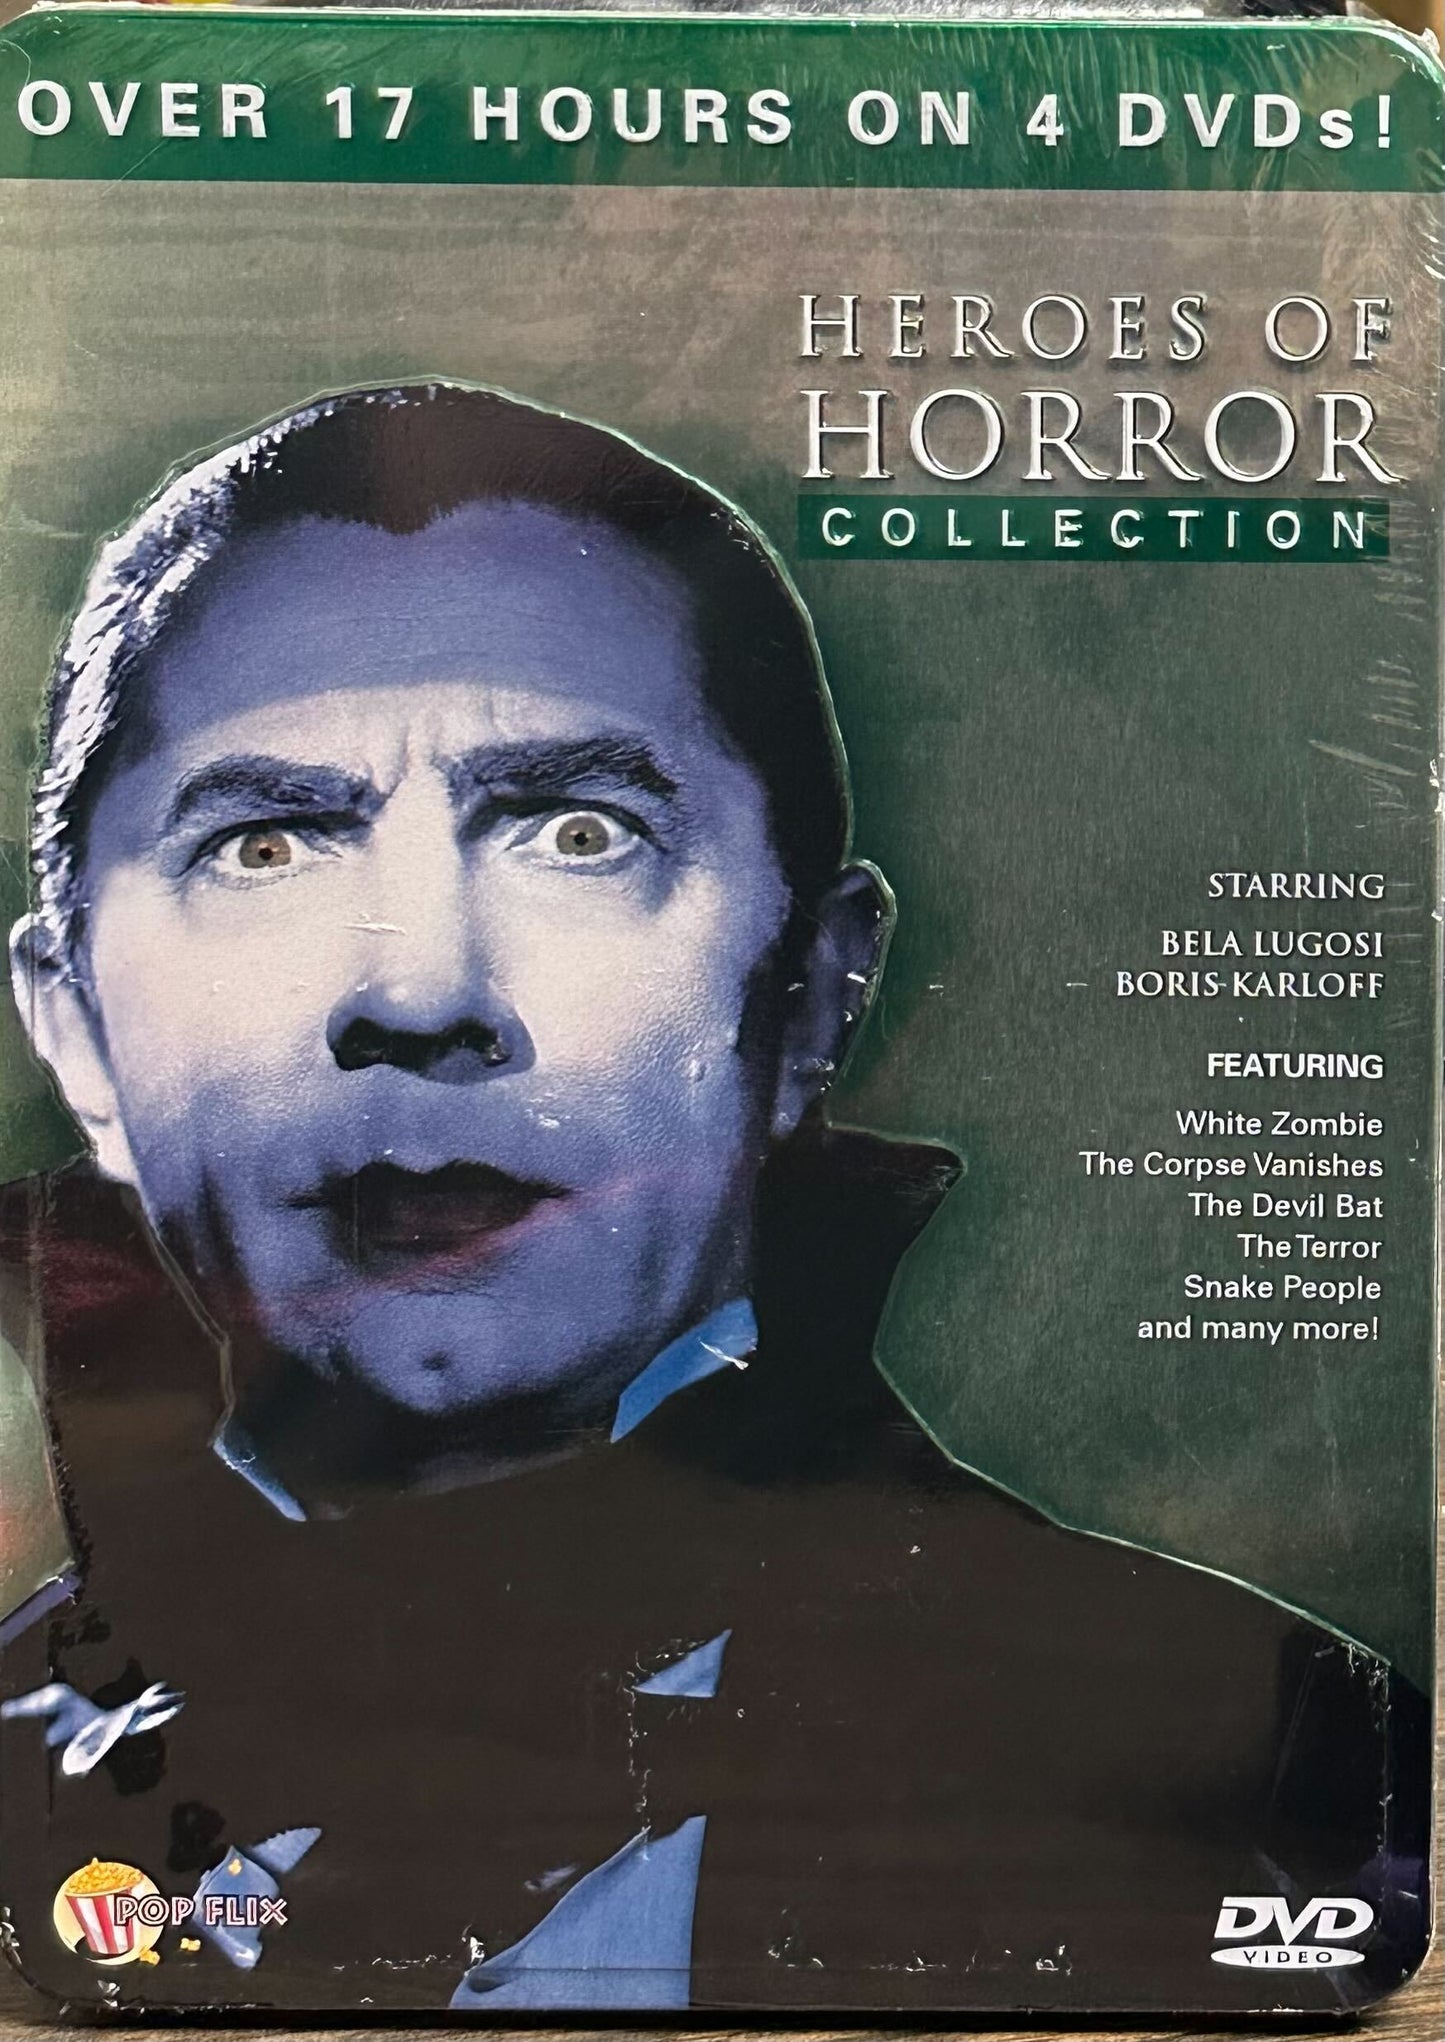 Heroes of Horror Collection DVD Tin